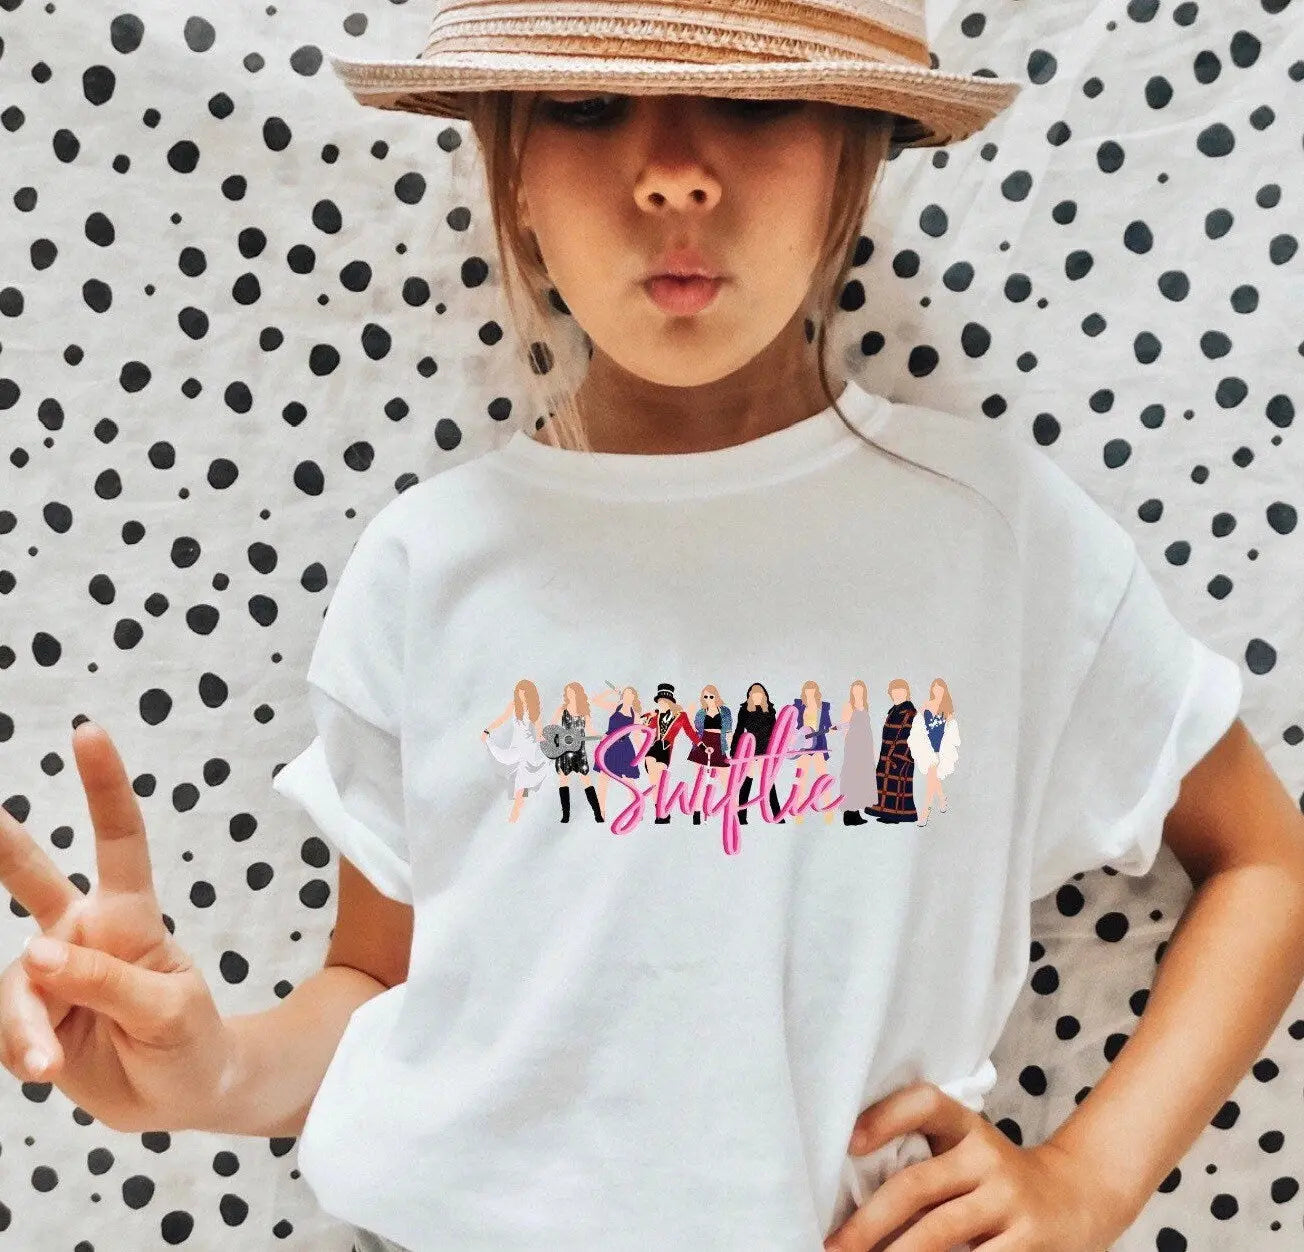 Taylor Swiftie Eras Kids T-Shirt, Perfect for Swift theme birthday or slumber parties, or pair with TS Concert tix! Latchkey